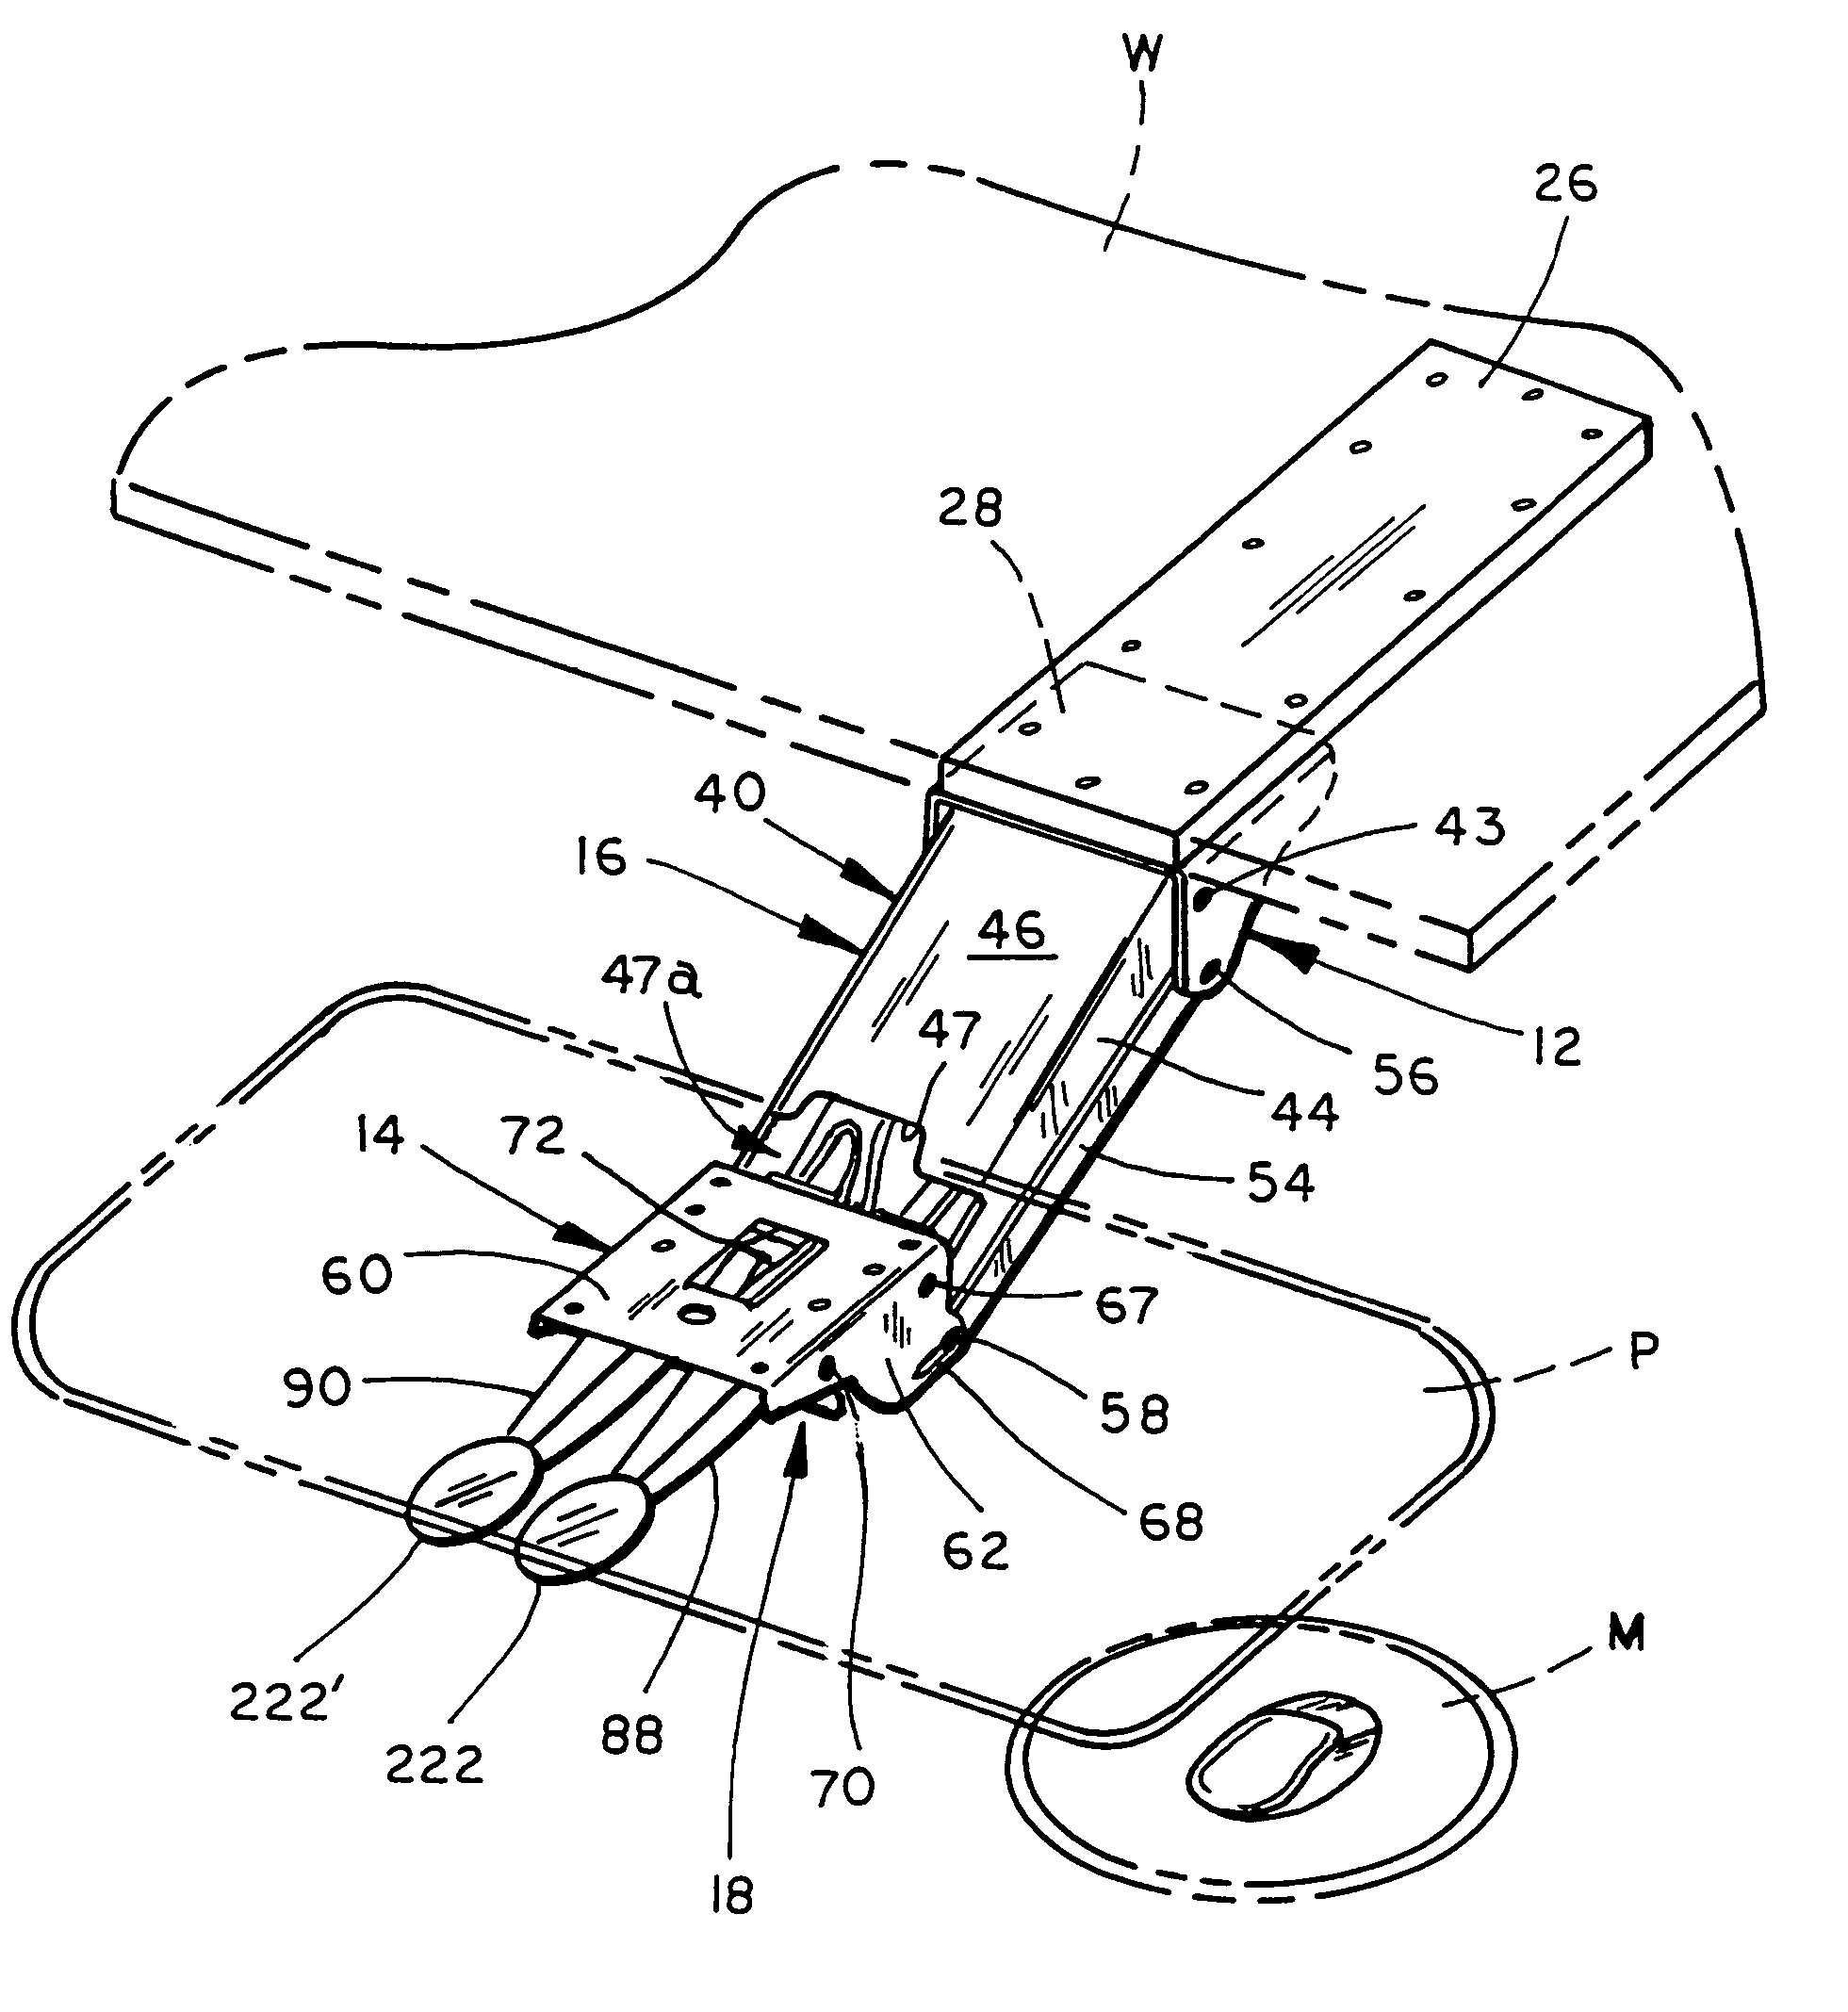 Adjustable support for data entry/interface device